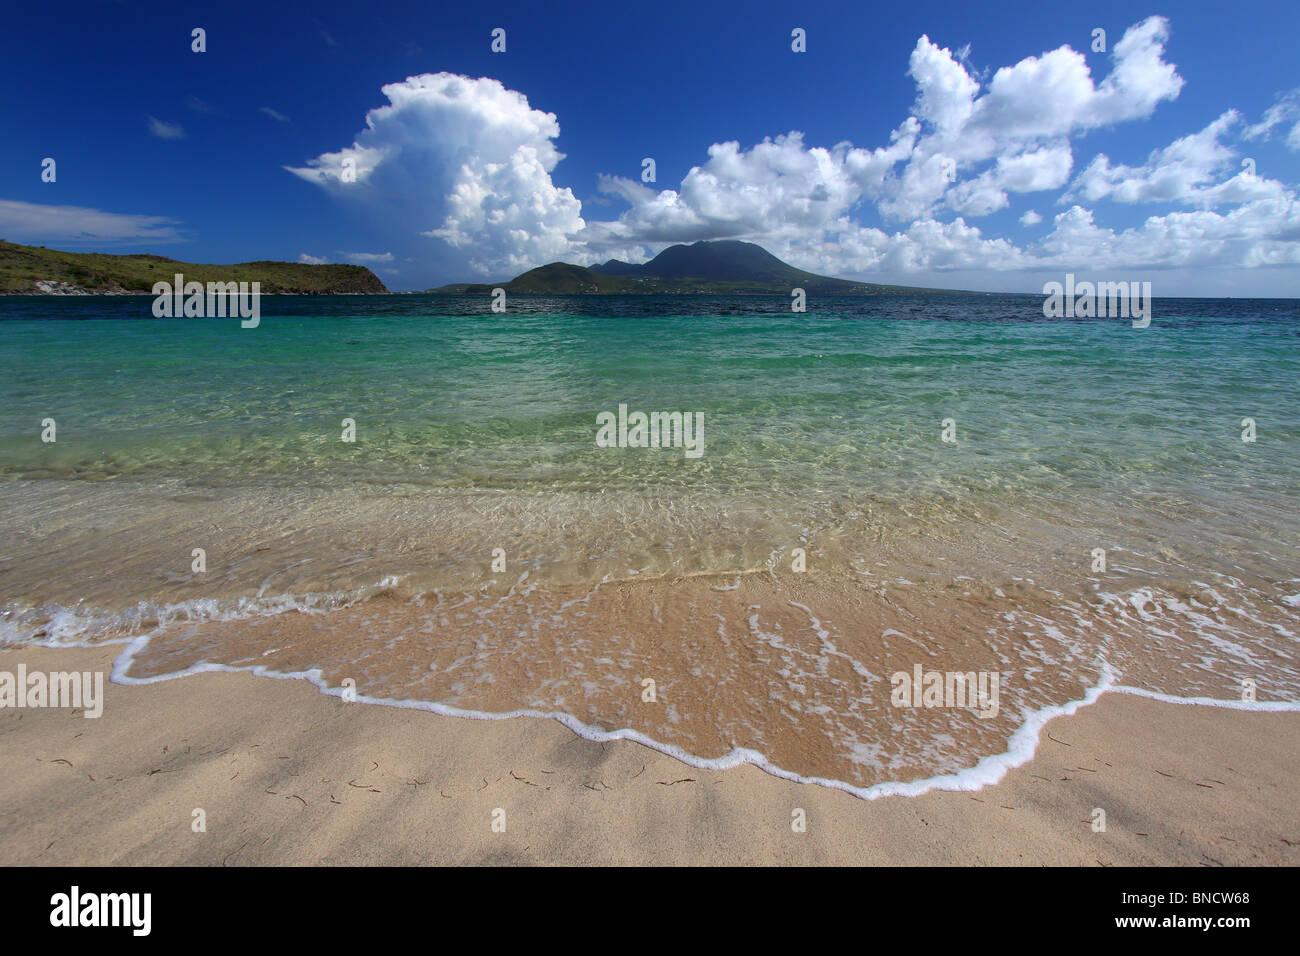 La majeure Bay Beach - St Kitts Banque D'Images